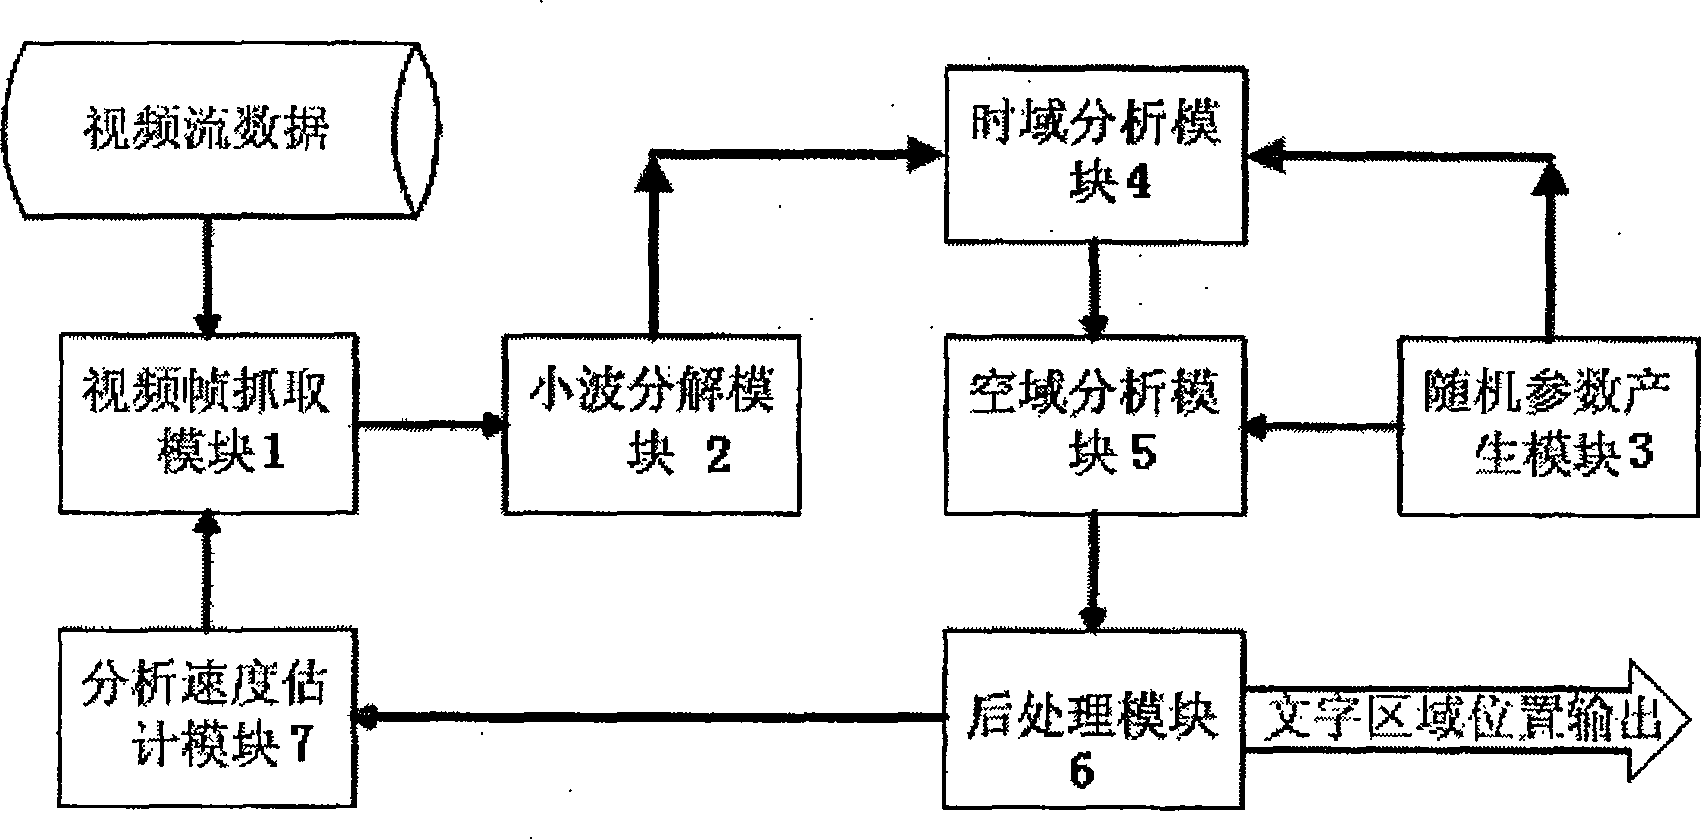 Method and system for fast detecting static stacking letters in online video stream